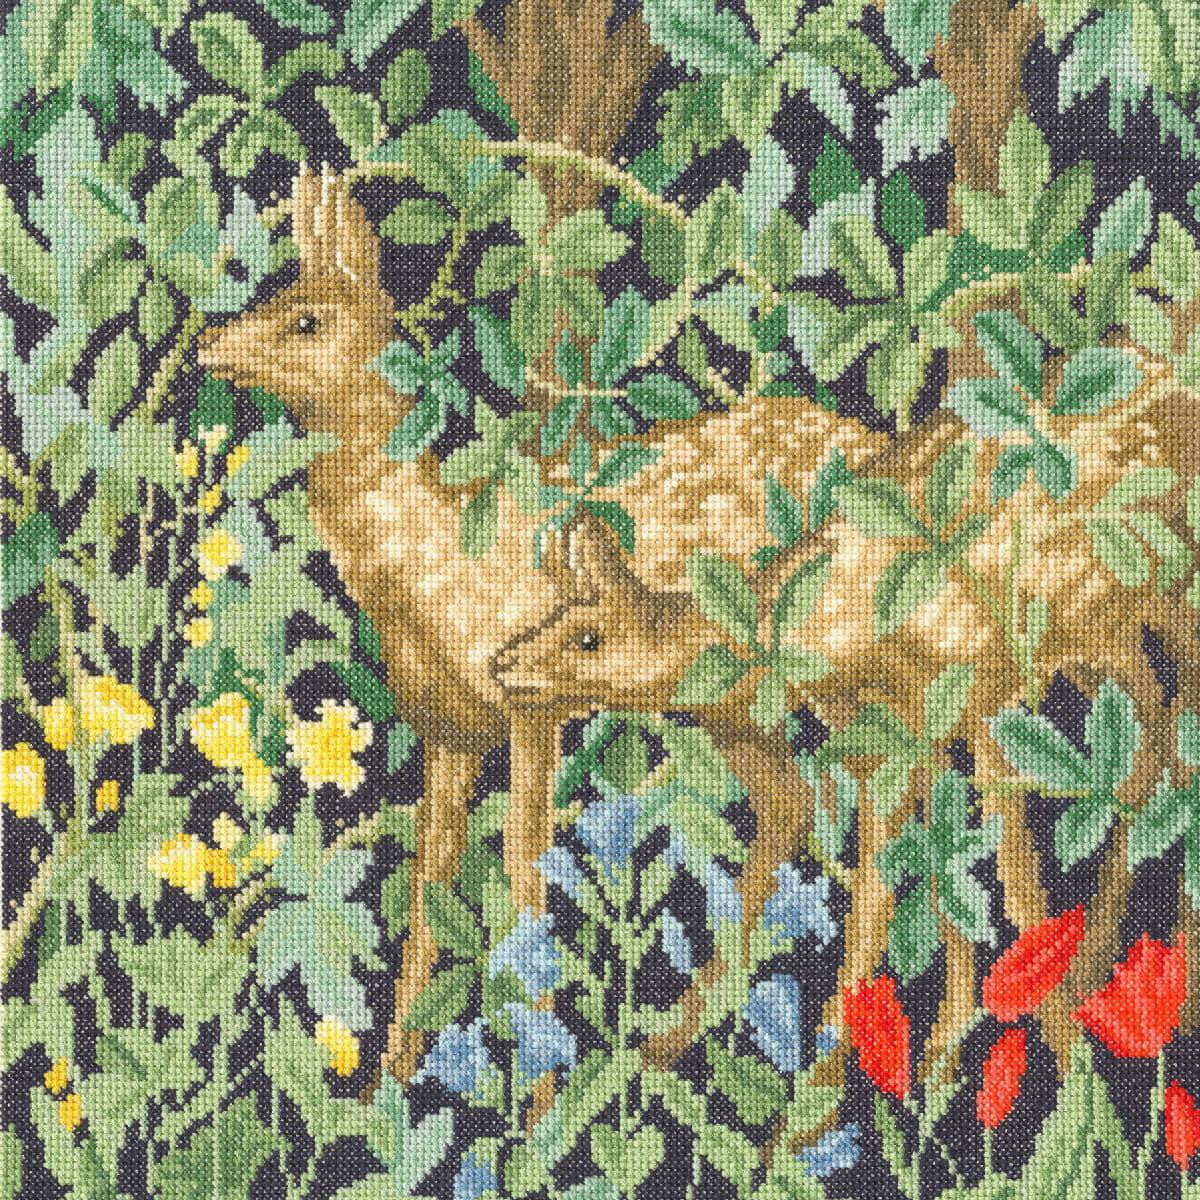 An intricate tapestry depicts two deer partially obscured...